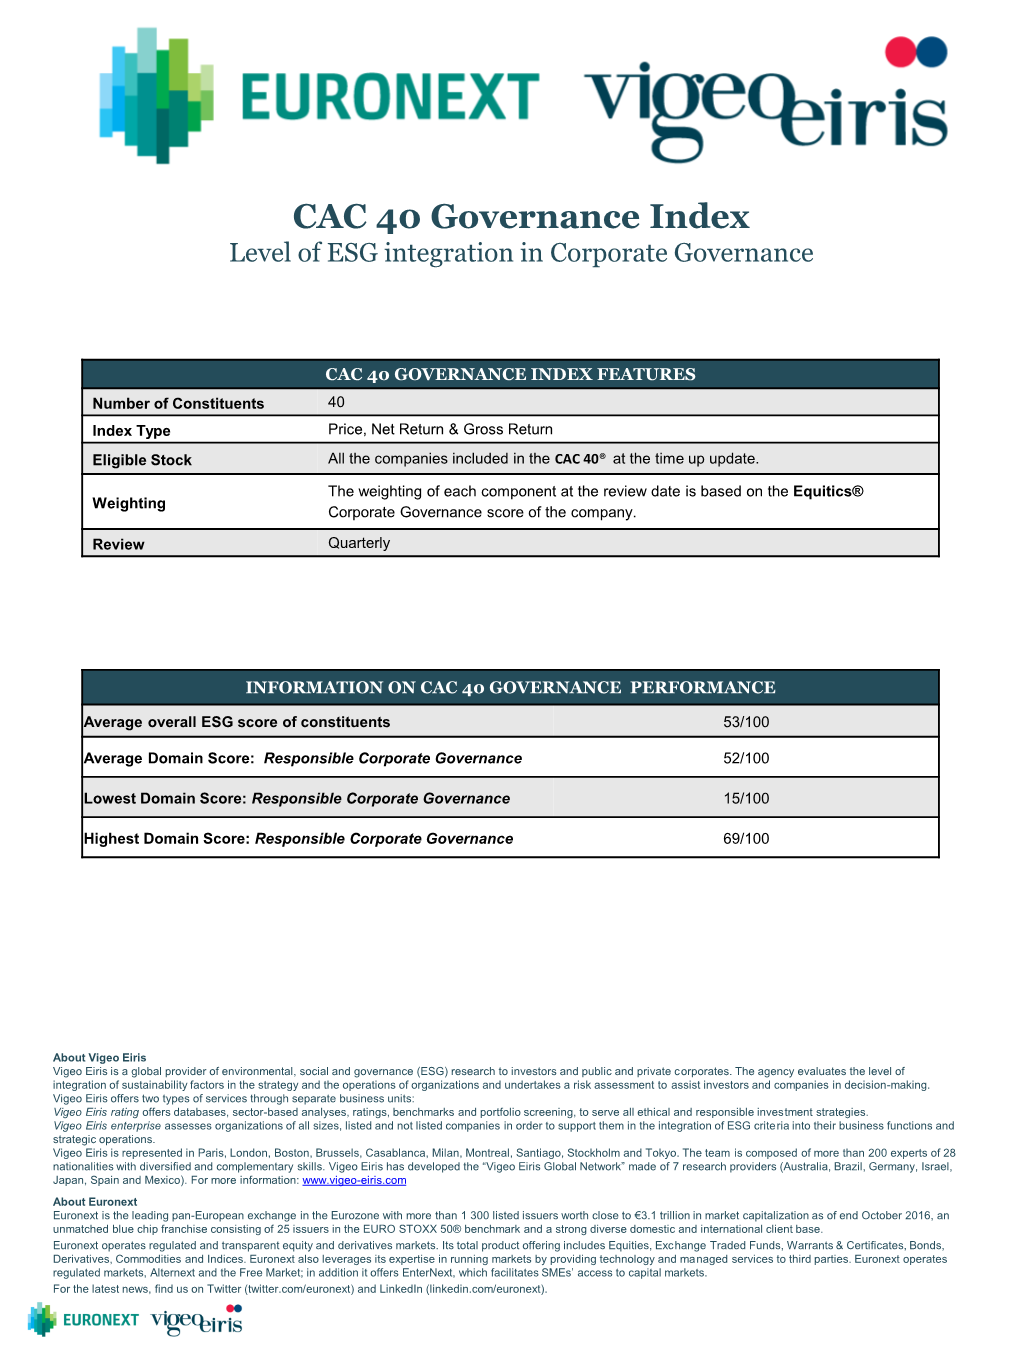 CAC 40 Governance Index Level of ESG Integration in Corporate Governance